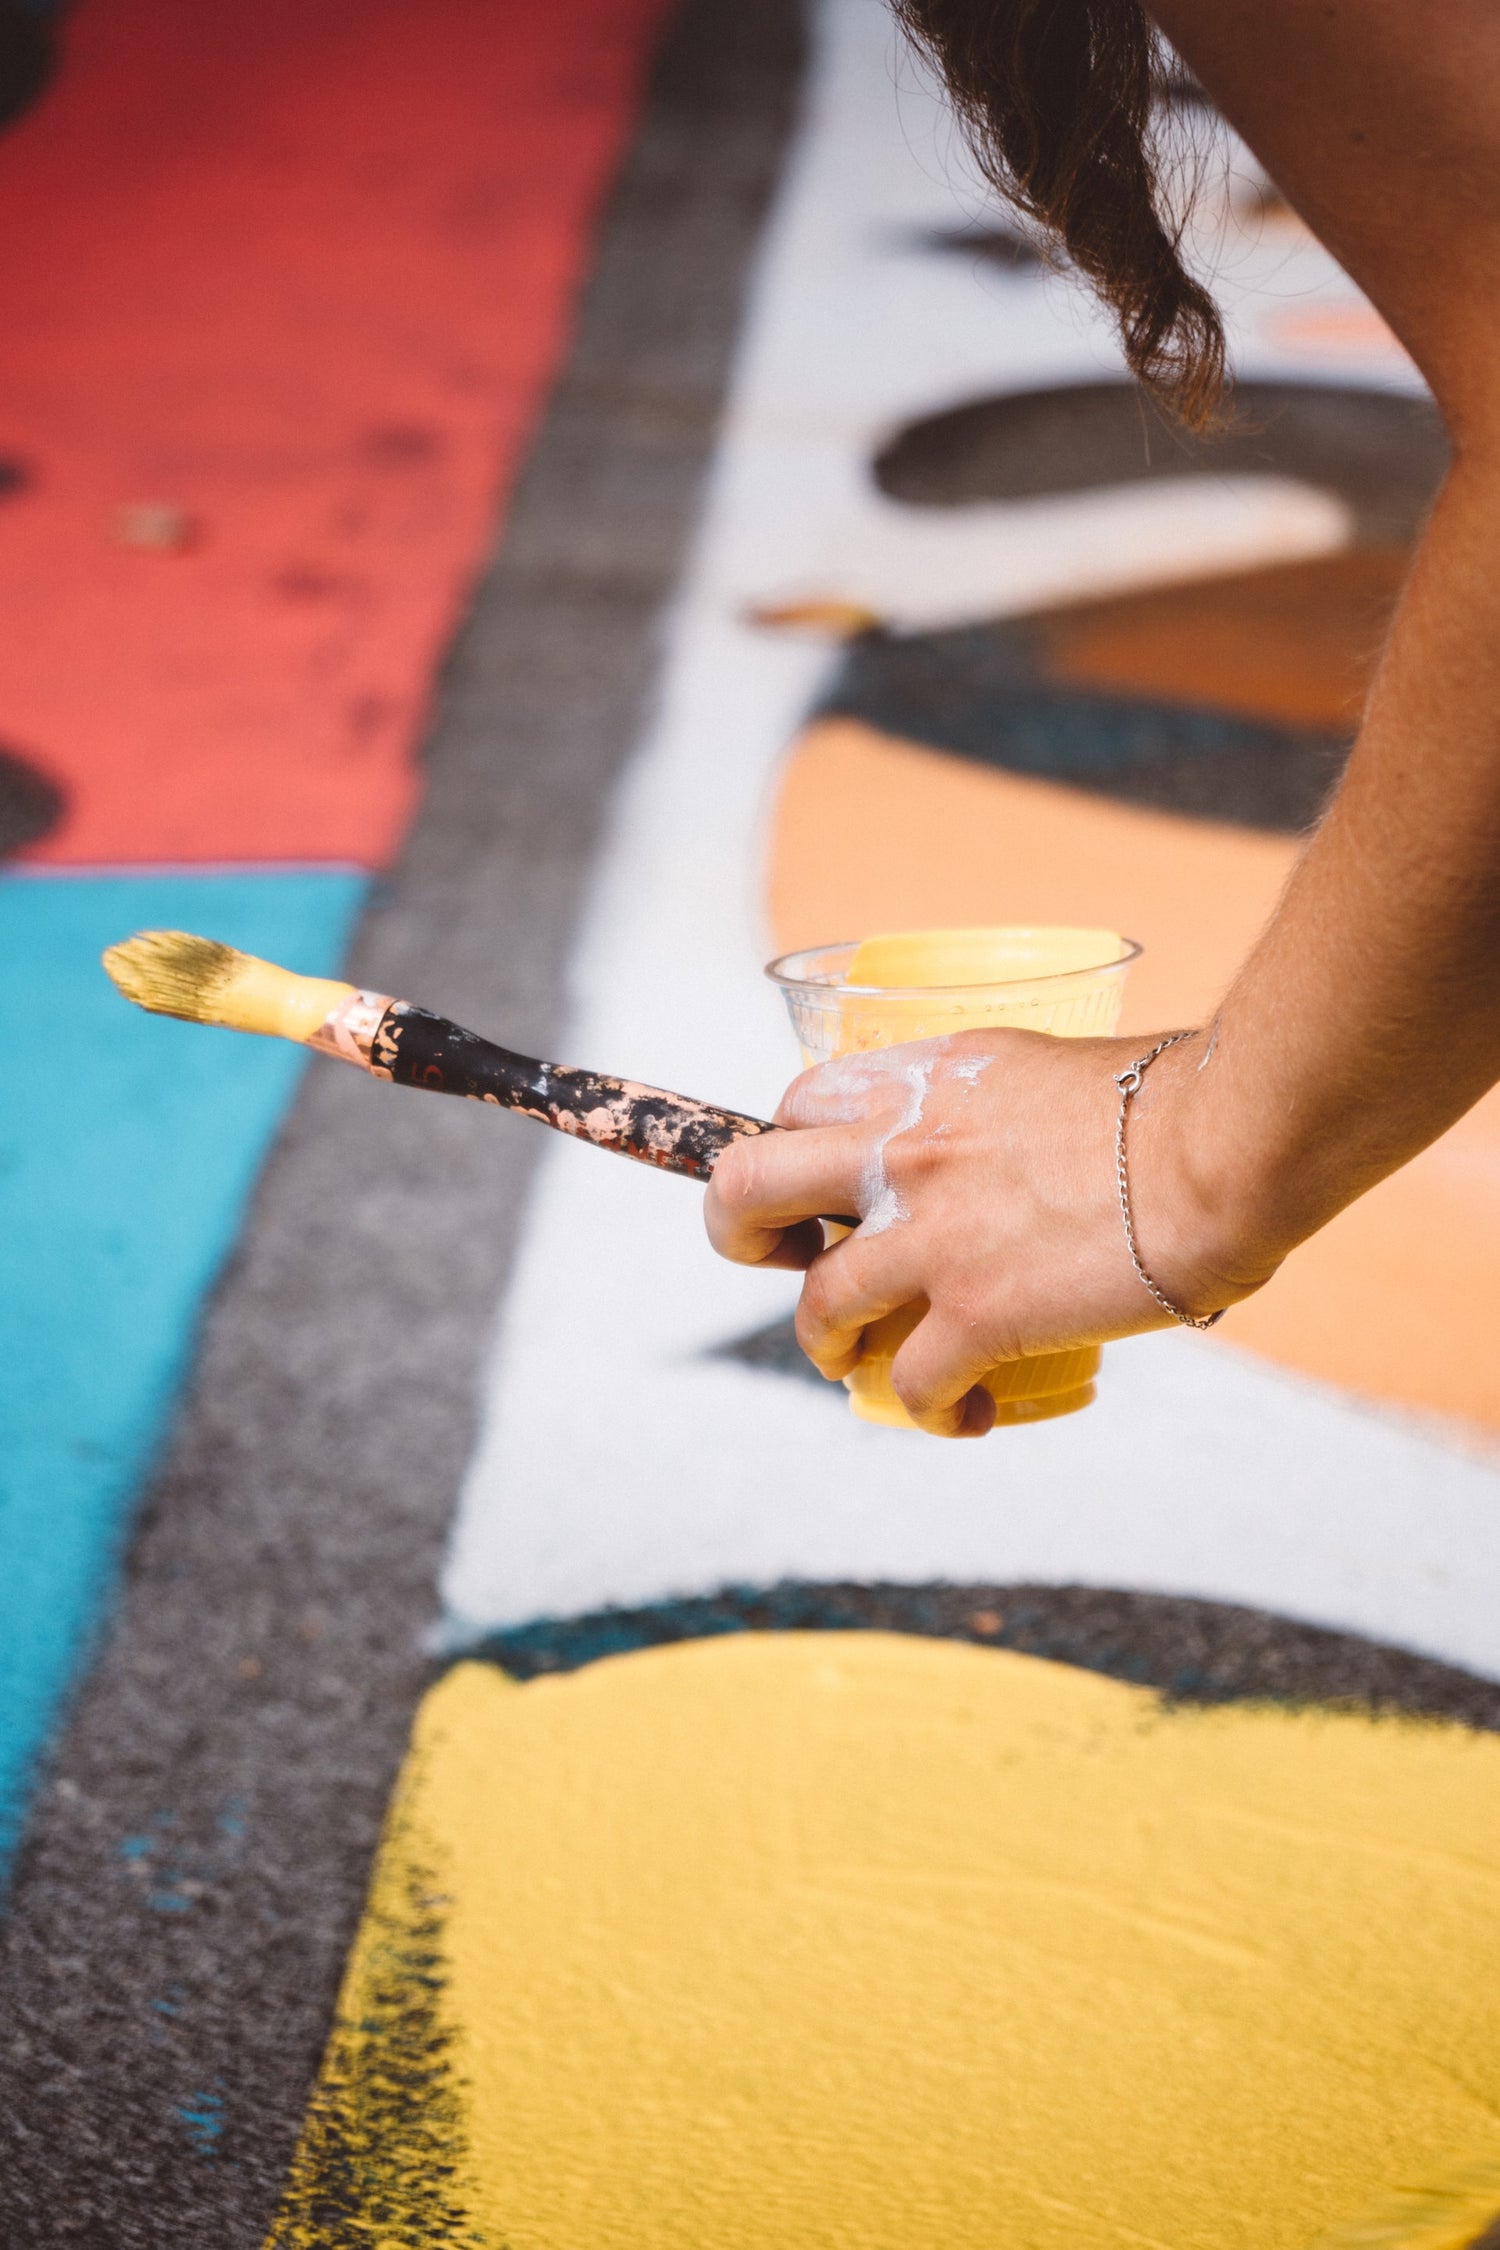 Closeup of an artist live painting a mural painting for the public at Vancouver Mural Fest with yellow paint, custom murals available. Photo by Jaunt and Joy on Unsplash